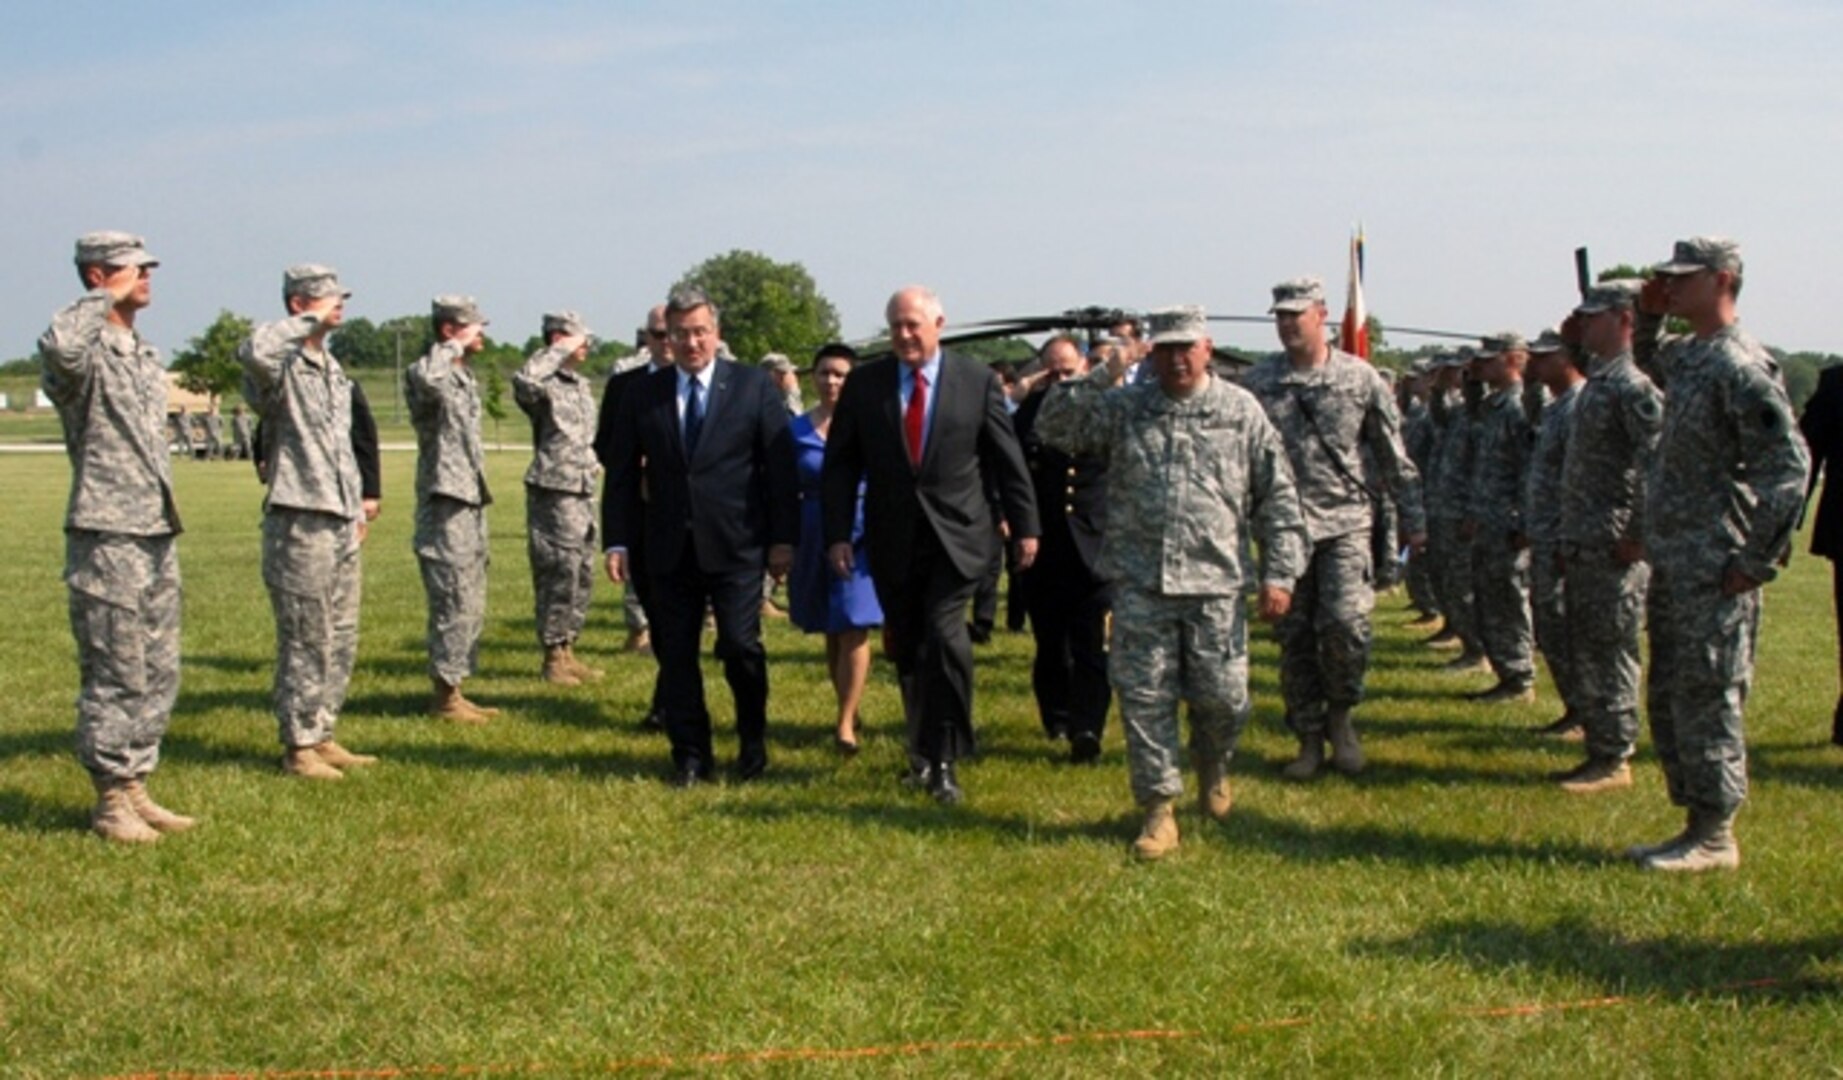 Polish President Bronislaw Komorowski visited Illinois Army National Guard Soldiers and five Polish officers who were conducting training May 20, 2012 at the Marseilles Training Center in Marseilles, Ill. Komorowski was accompanied by Illinois Gov. Pat Quinn and senior leaders of the Illinois National Guard, to include Army Maj. Gen. William L. Enyart, the adjutant general of the Illinois National Guard. Komorowski presented Quinn, Enyart, and 13 other Illinois Guard members with the Commander's Cross of the Order of Merit of the Republic of Poland, an honor that is bestowed upon foreigners for distinguished contributions to international cooperation with the nation of Poland.